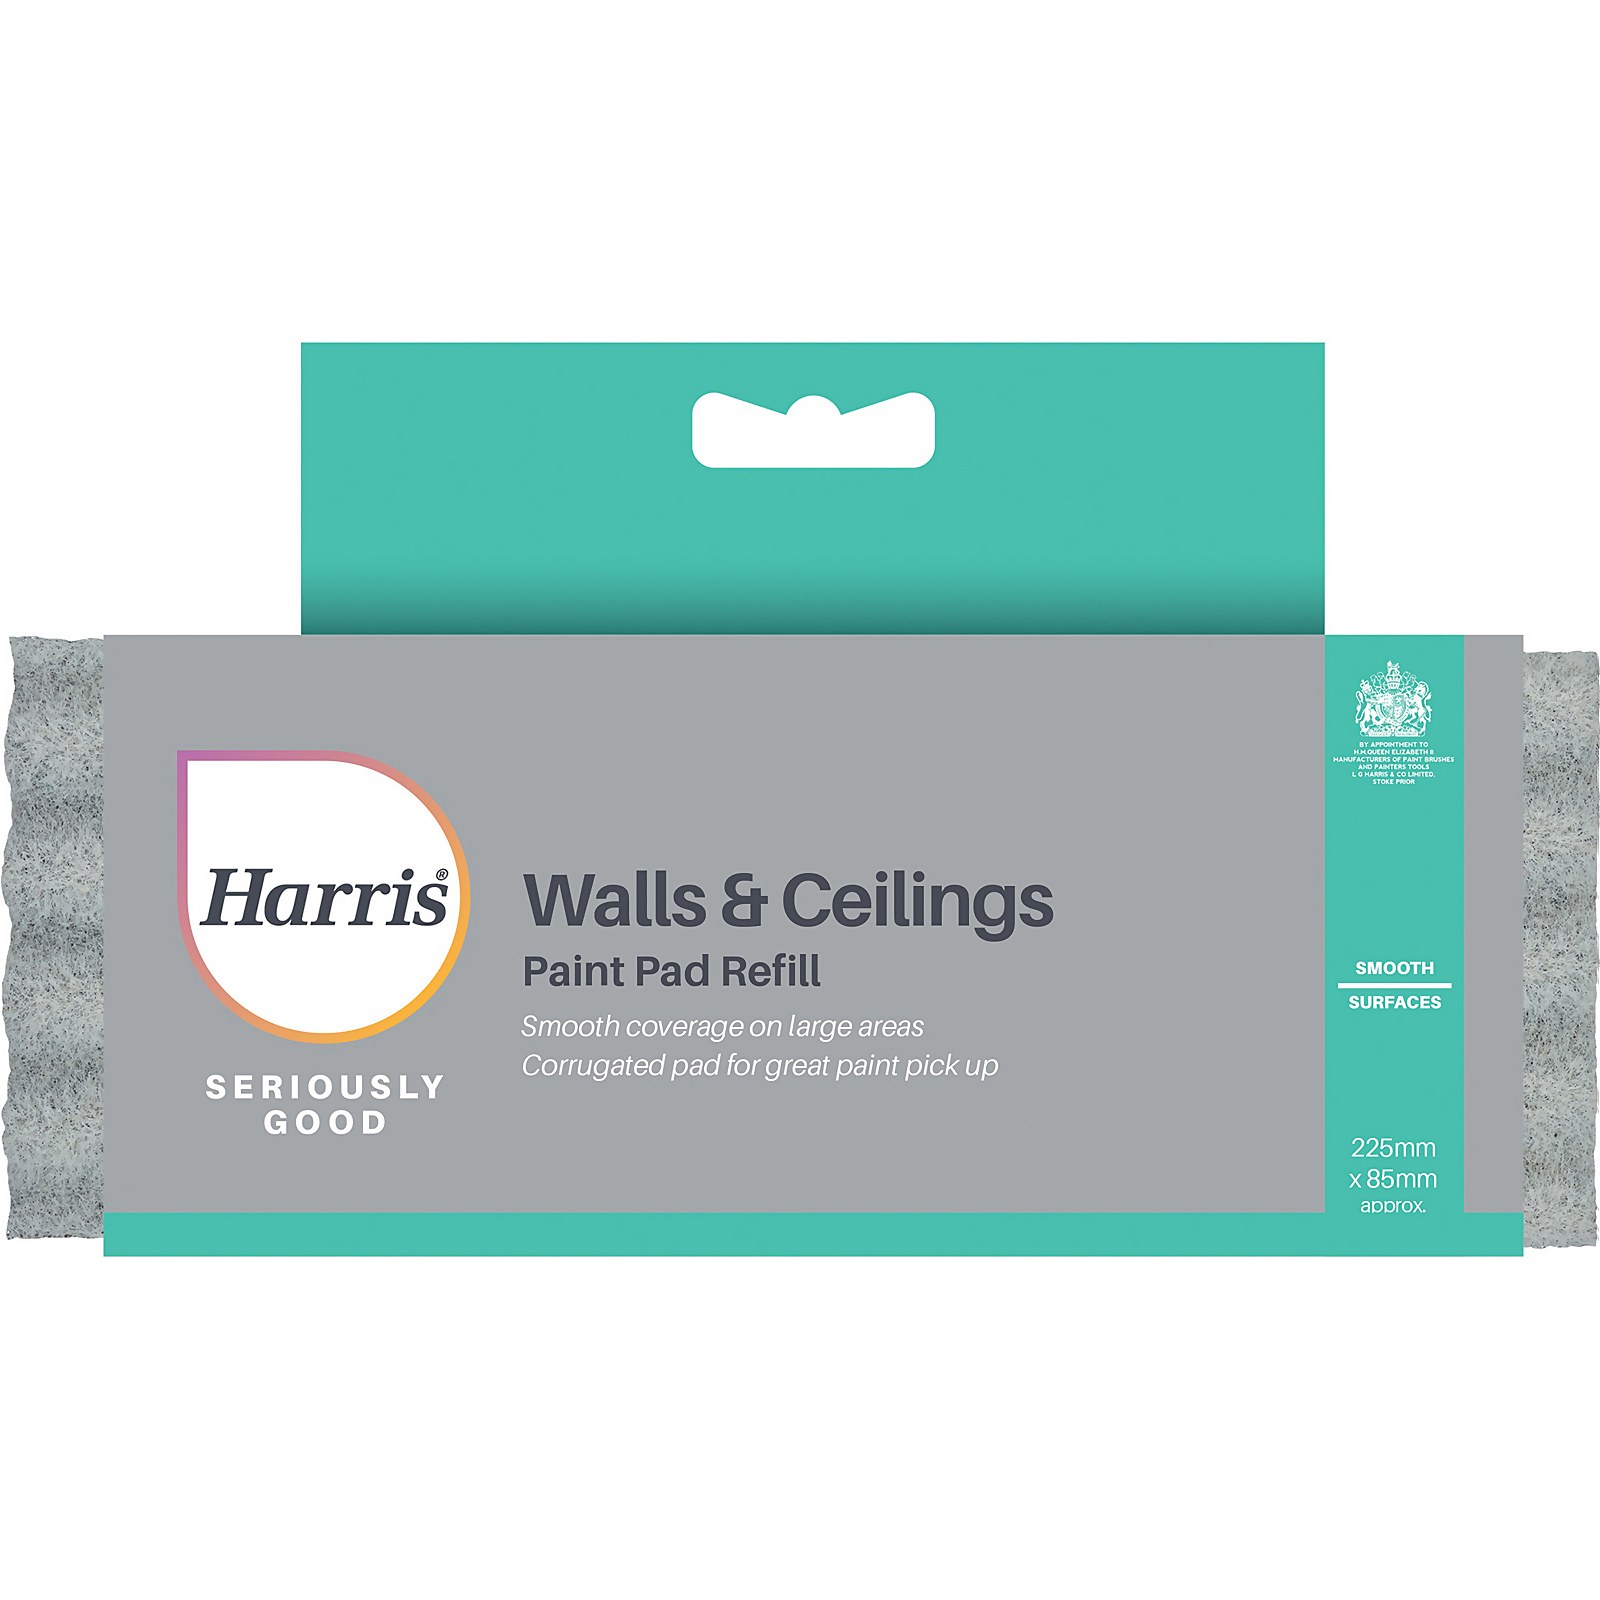 Photo of Harris Seriously Good Walls & Ceilings 9in Paintpad Refill